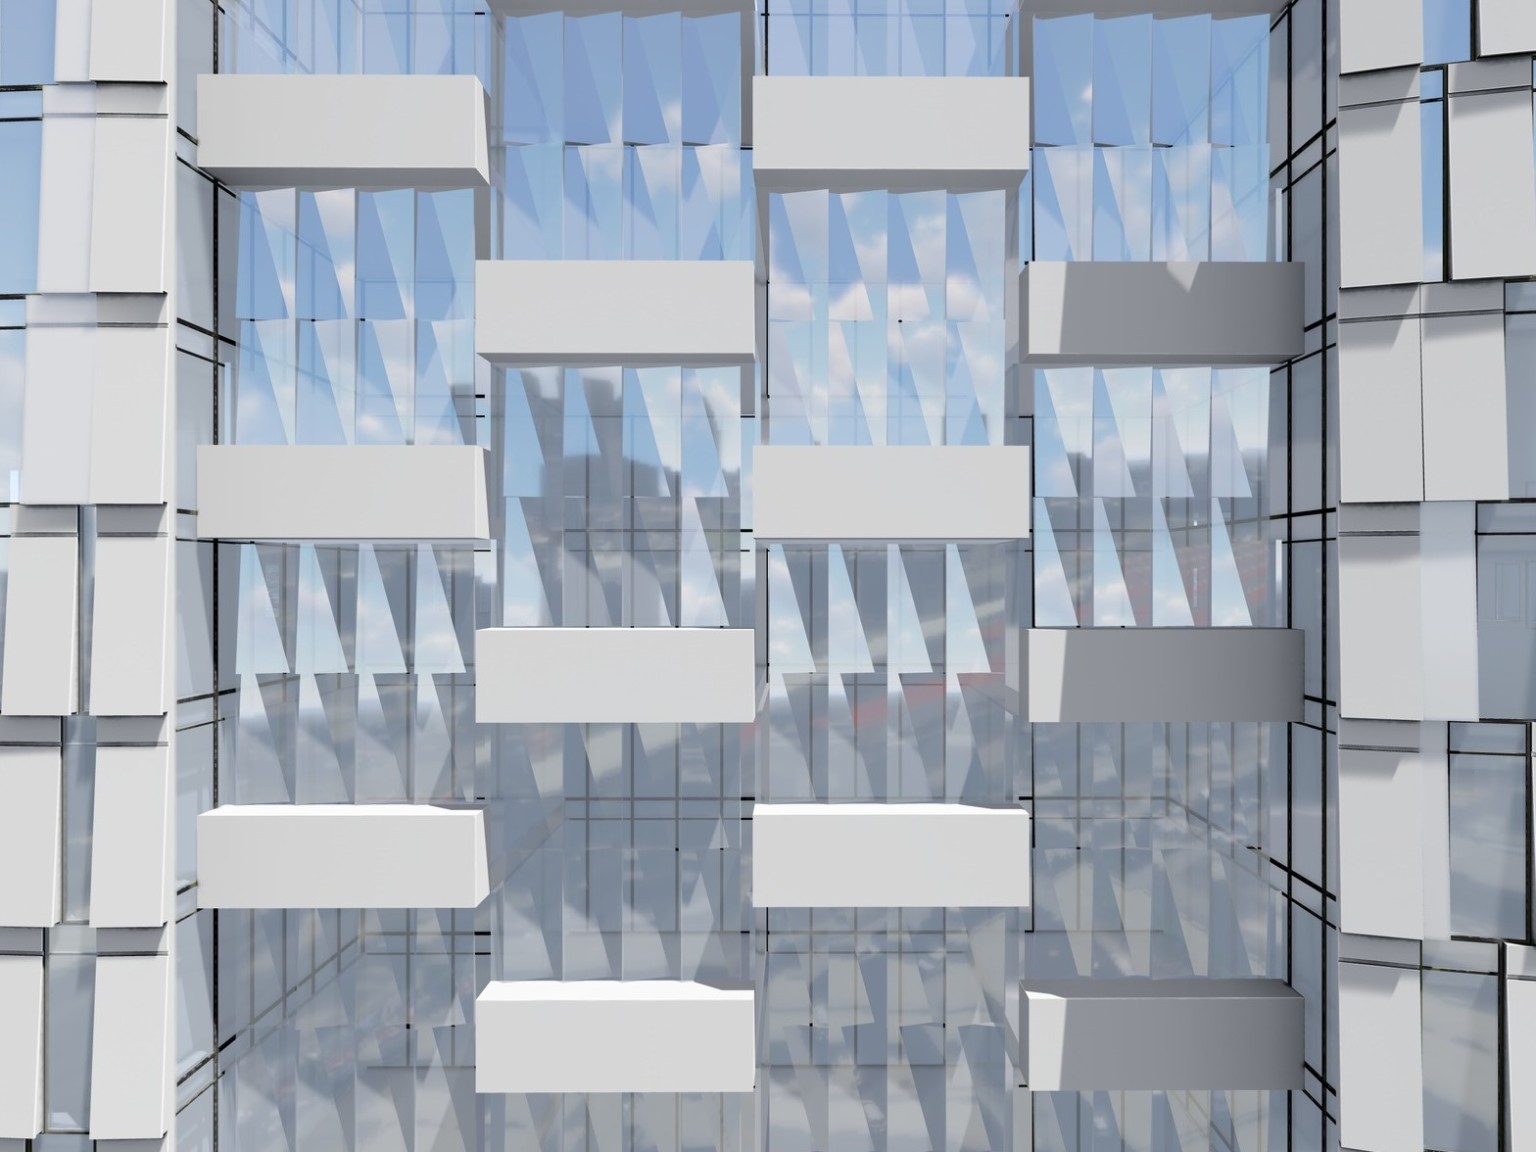 Close up view of recessed building section. White boxes hang, alternating, from window, creating a textural pattern and shade